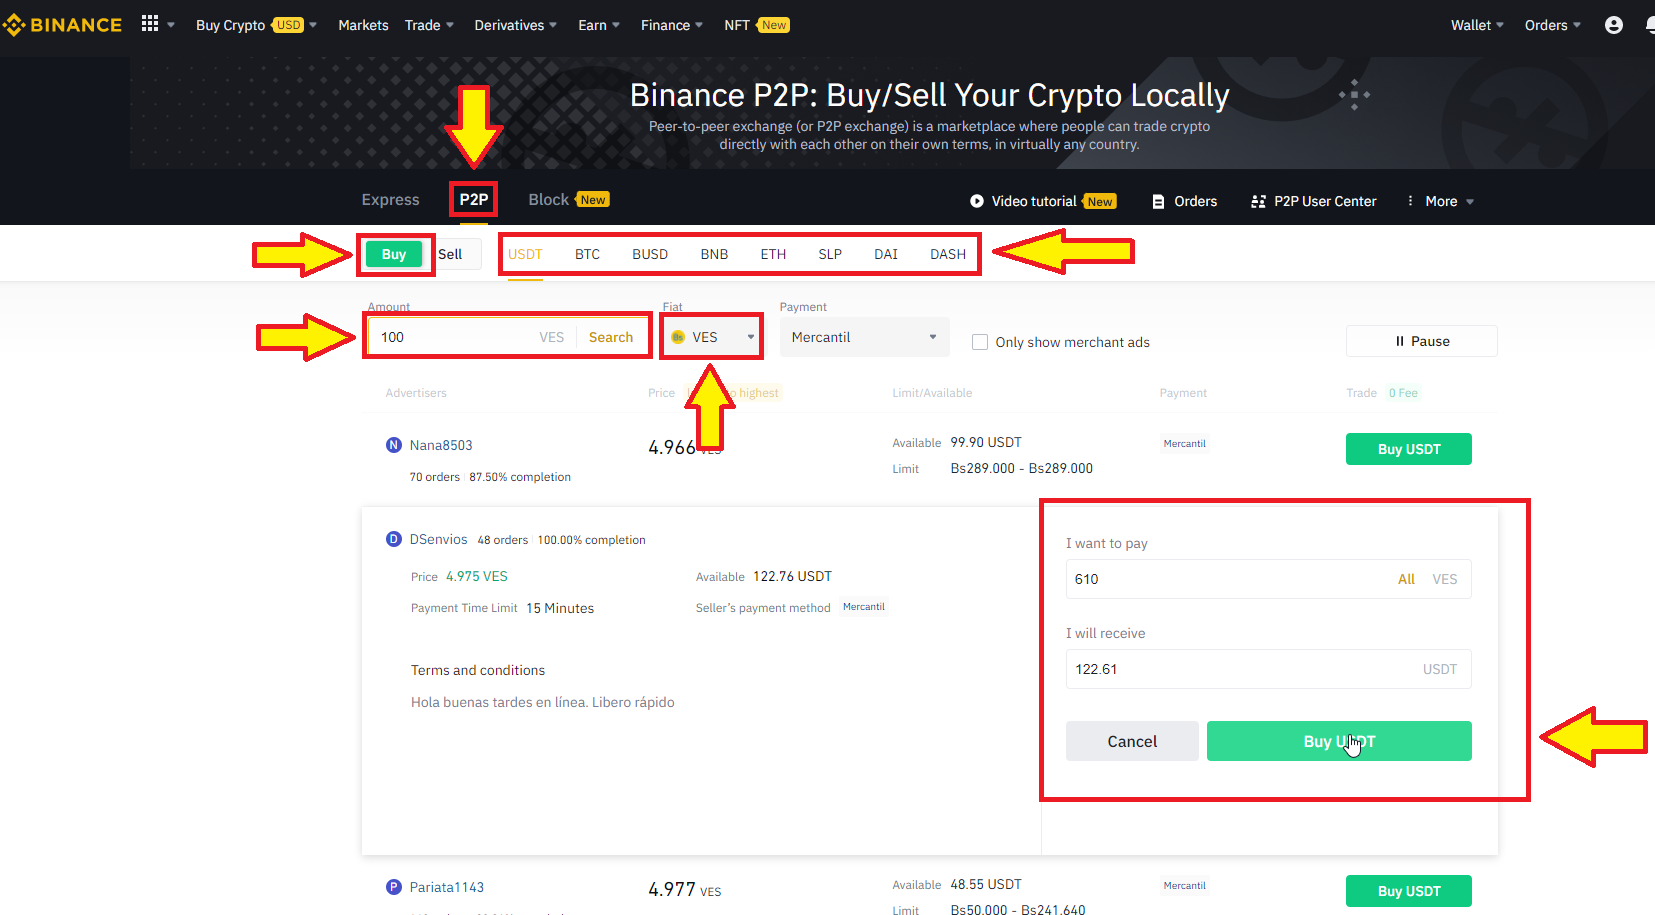 Buy KOK crypto in P2P with a verified account on Binance